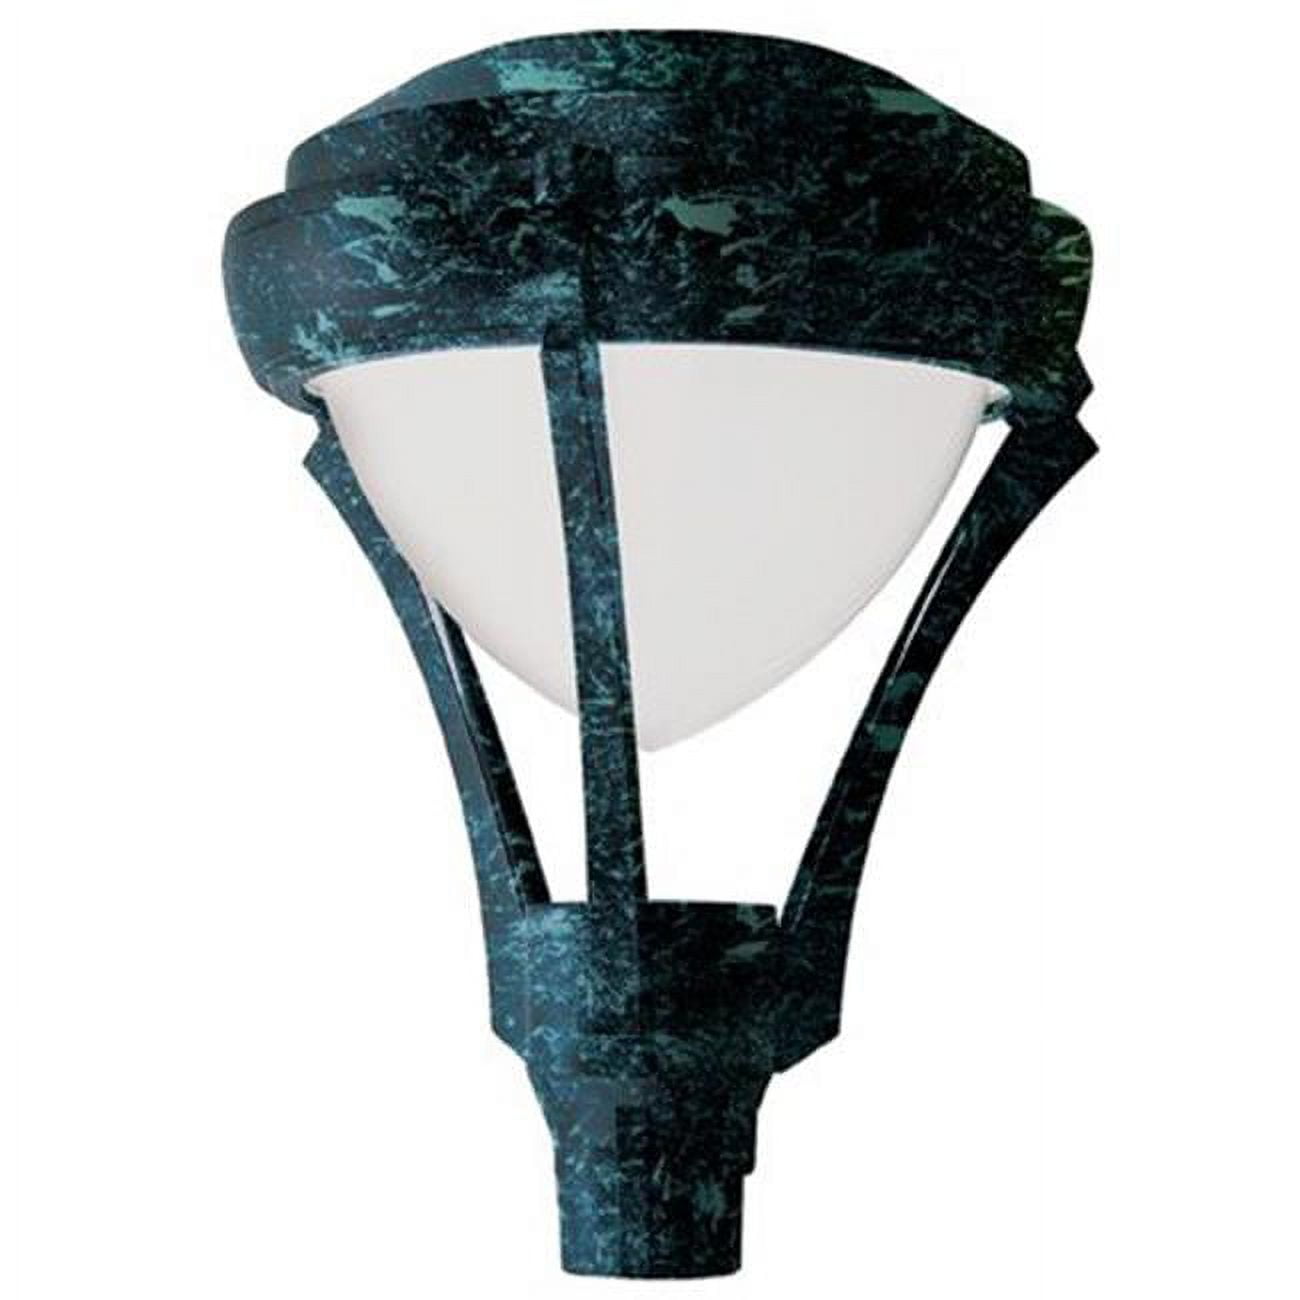 Picture of Dabmar Lighting GM594-VG 150W 120V Powder Coated Cast Aluminum Post Top Light Fixture with High Pressure Sodium Lamp, Verde Green